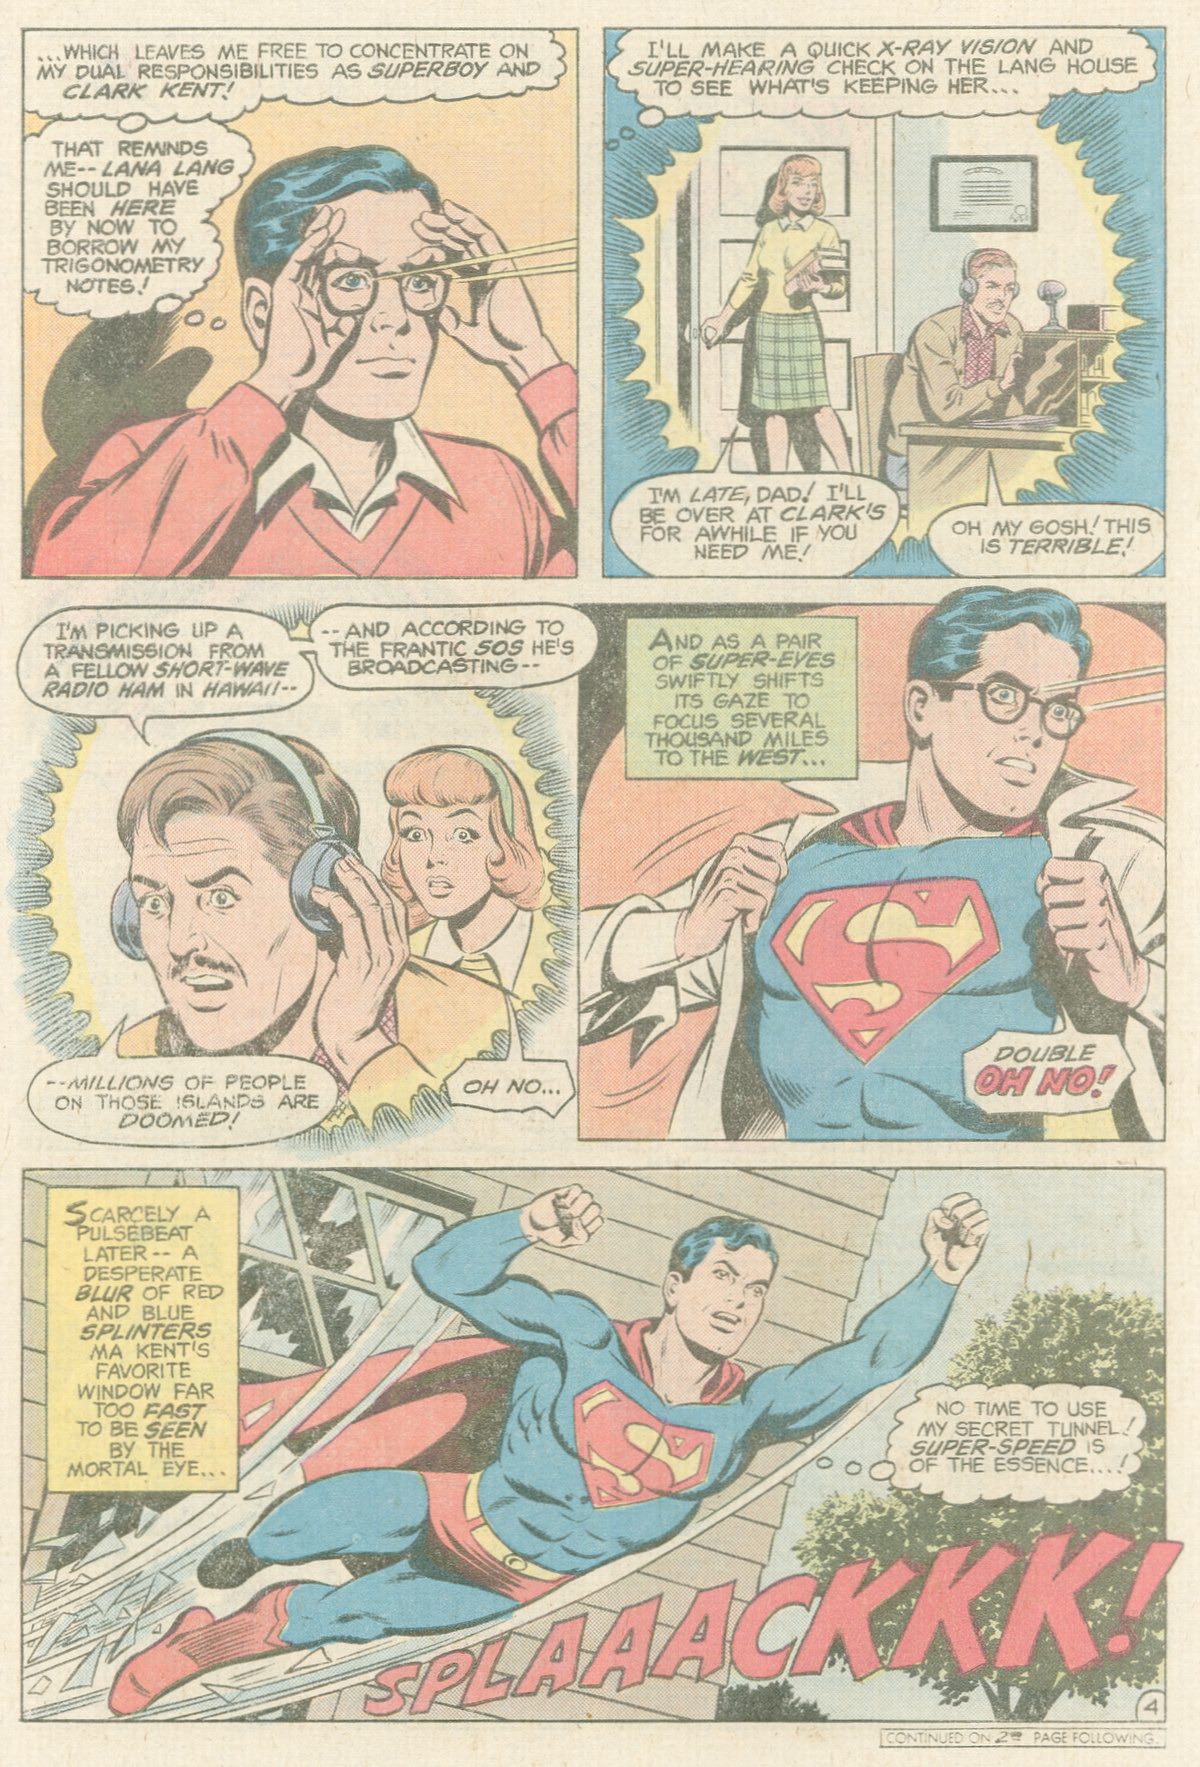 The New Adventures of Superboy 22 Page 4